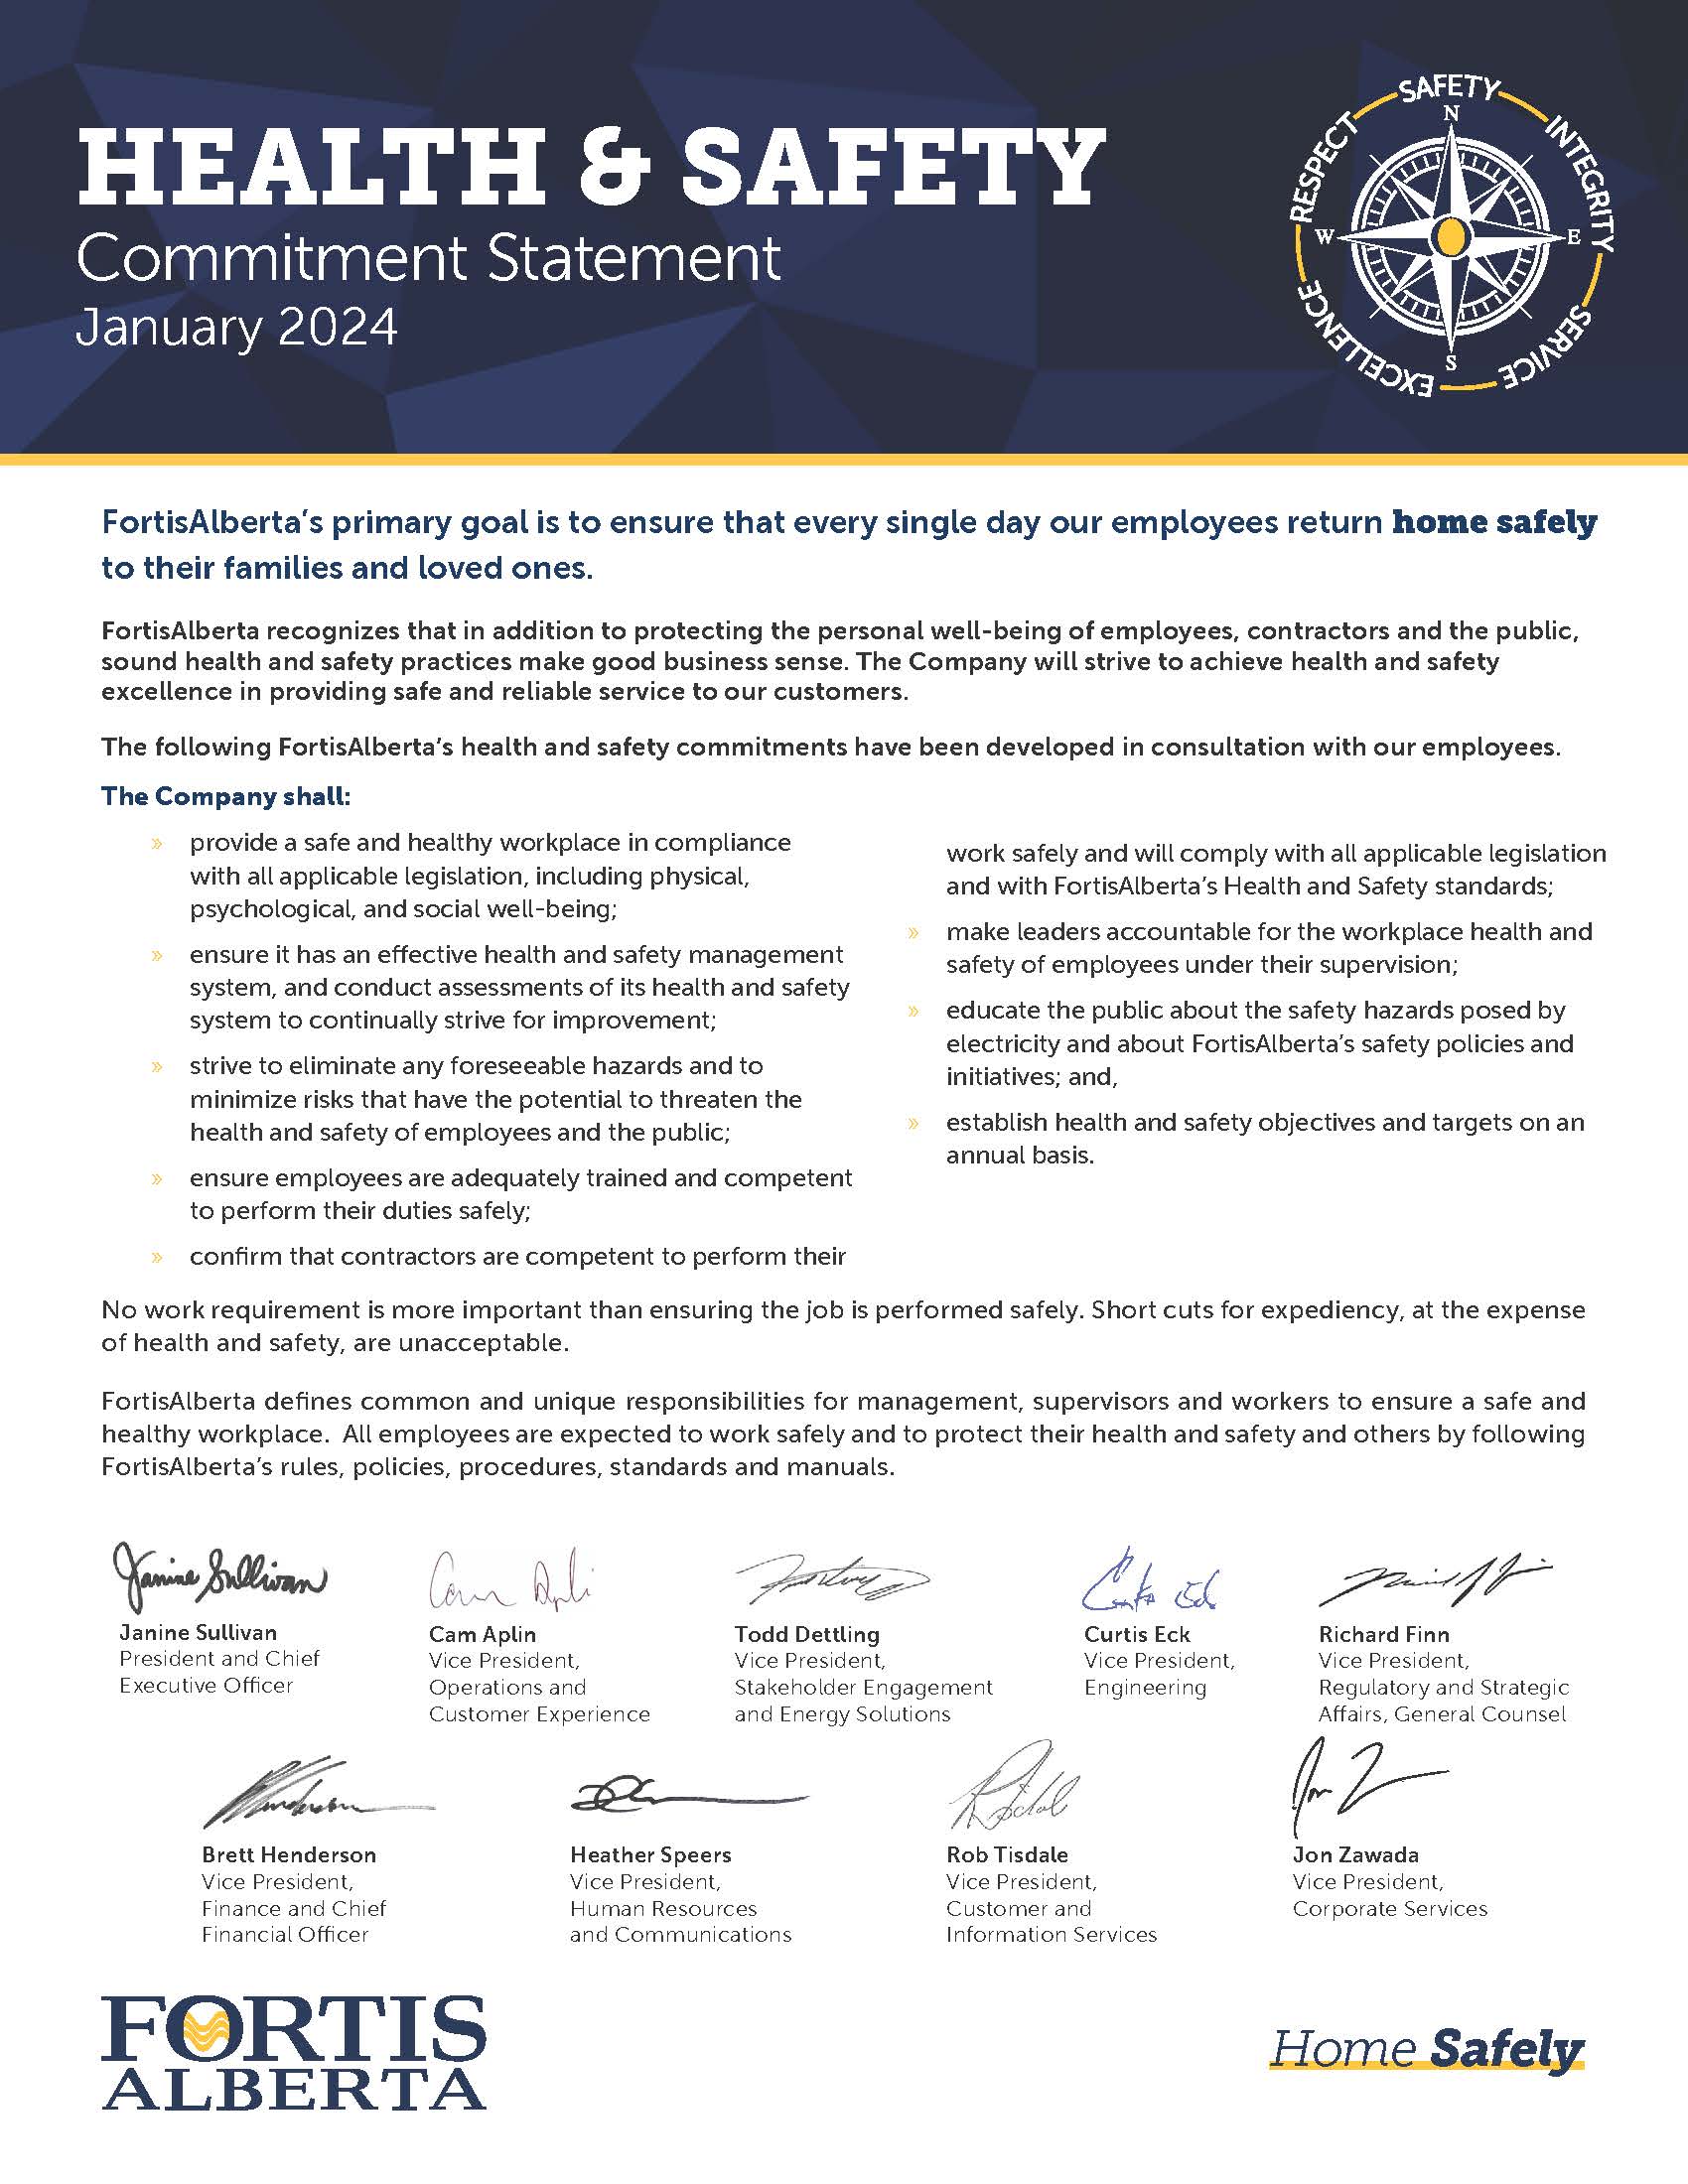 Health and Safety - Commitment Statement